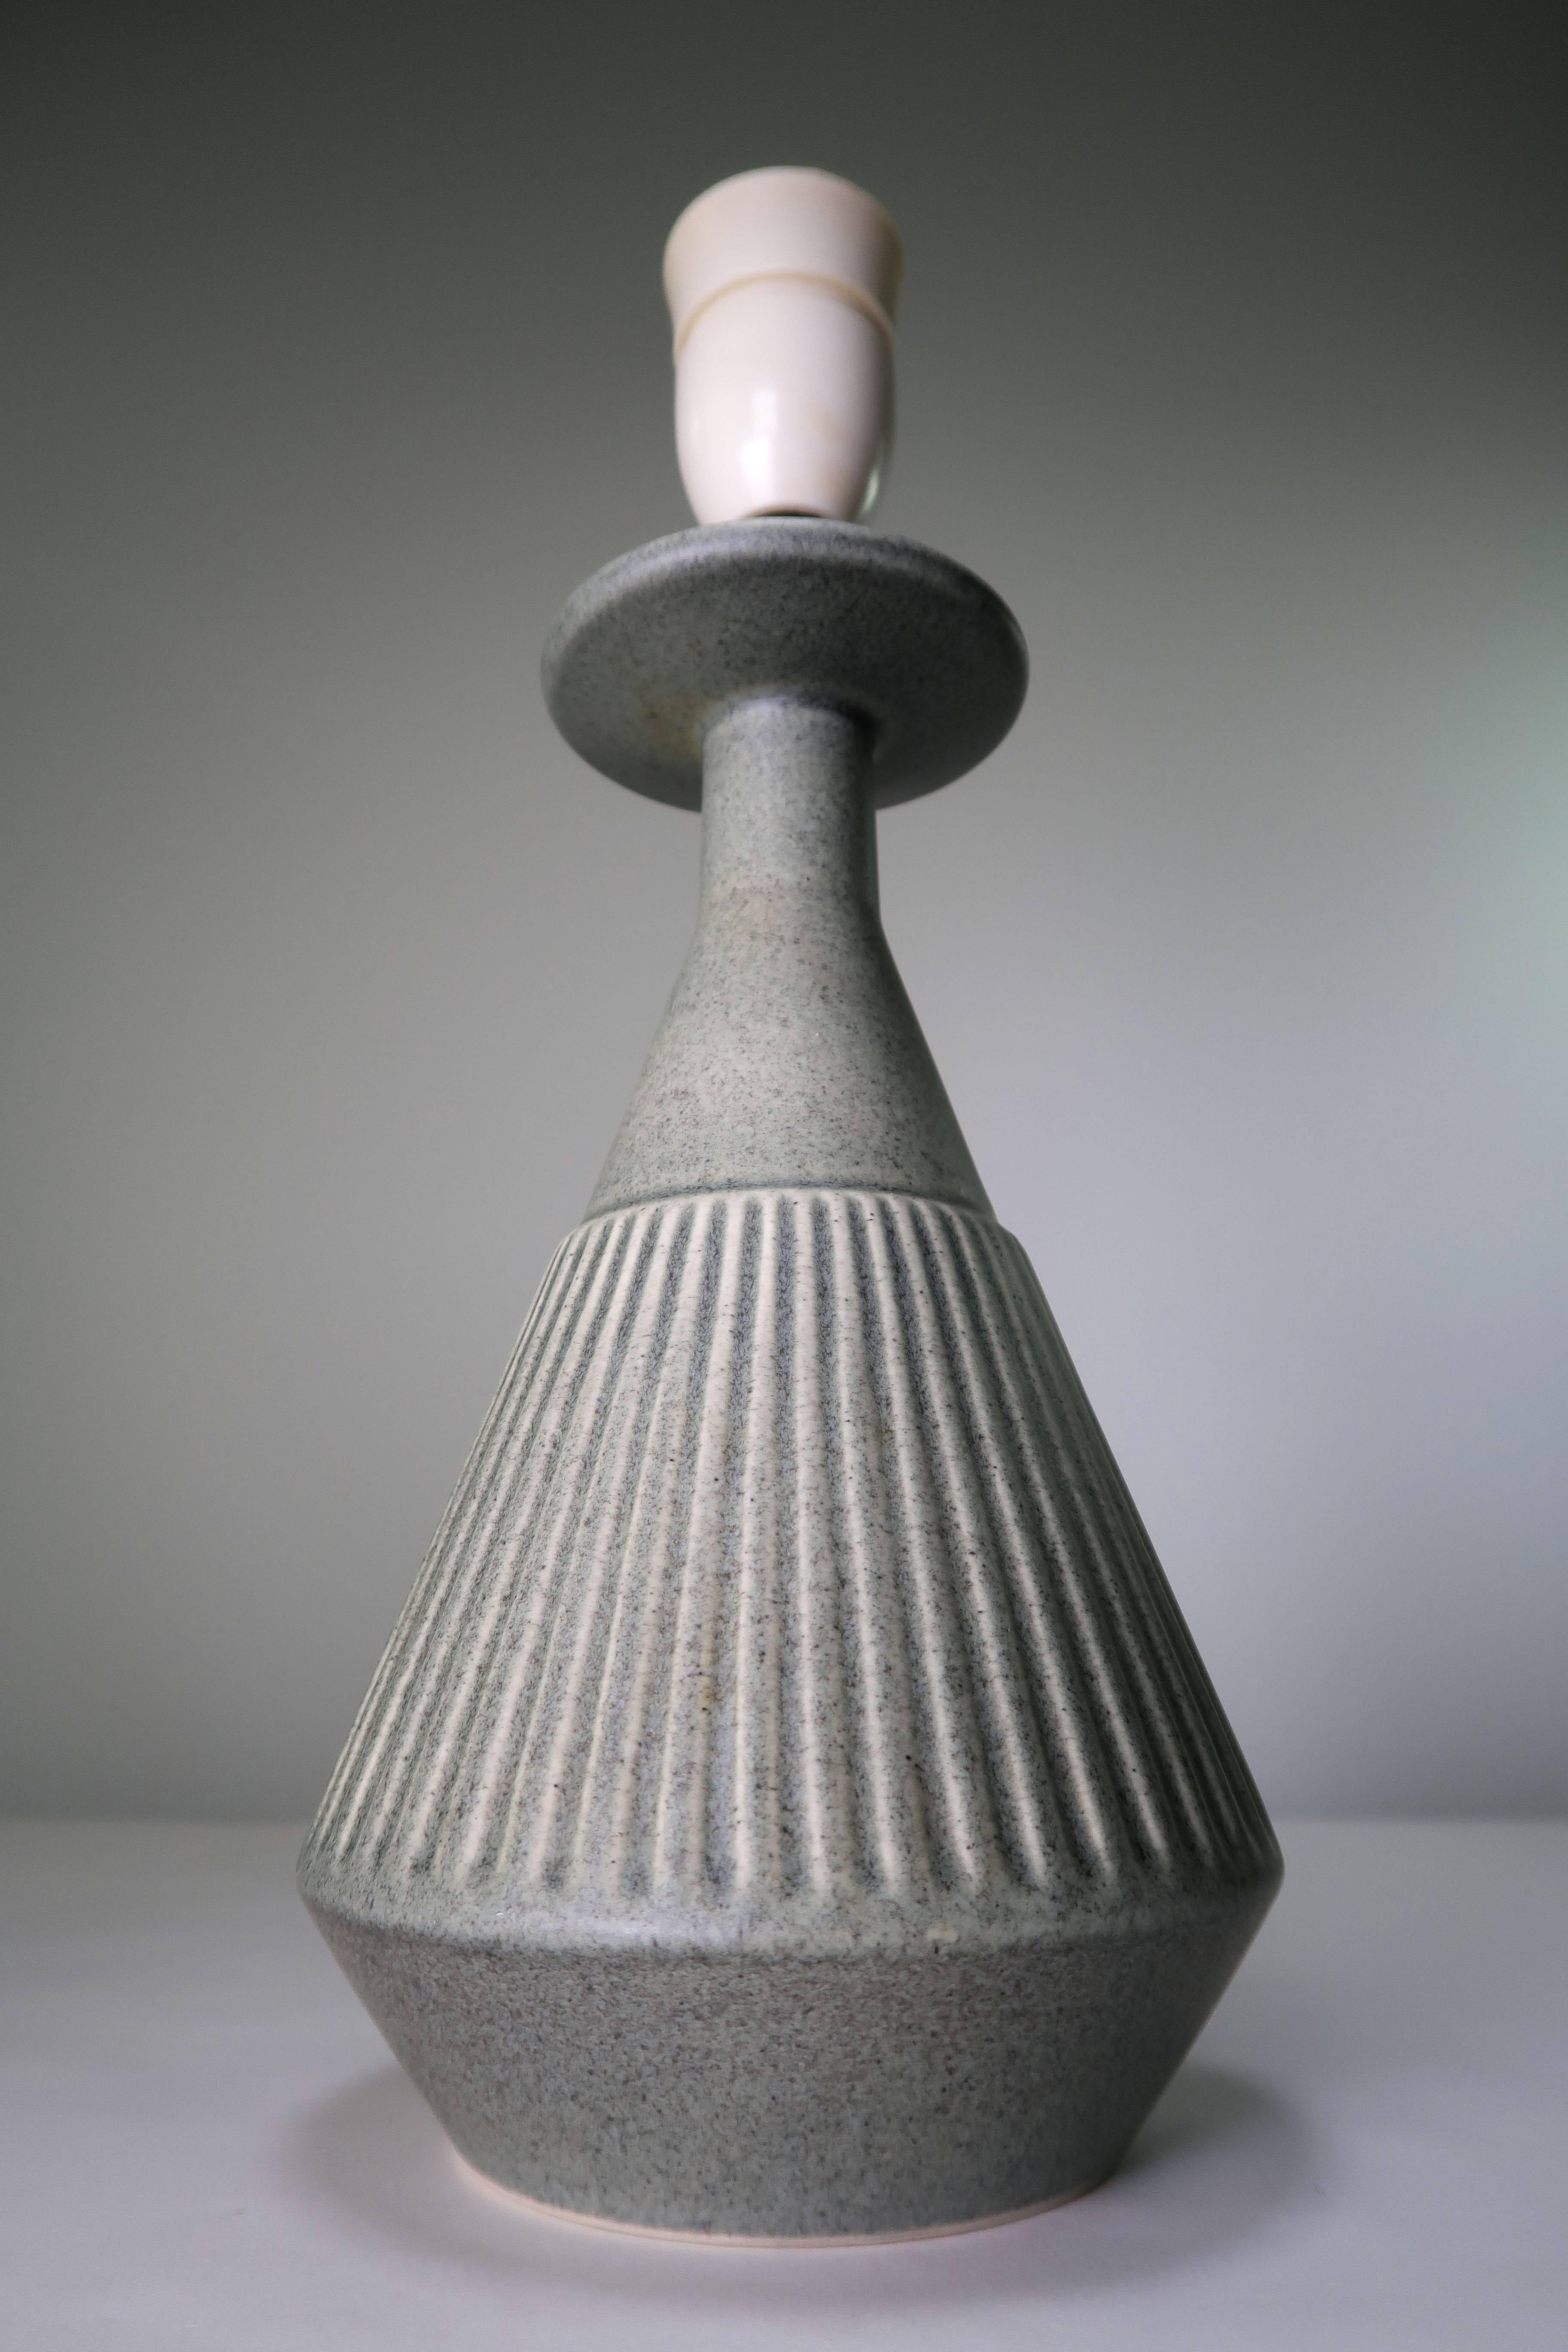 Danish Mid-Century Modern sculptural and elegant handmade stoneware table lamp with sage green glaze by acclaimed Danish manufacturer Soholm Stentoj. Manufactured on the Danish island of Bornholm in the 1960s. Brass top and geometric striped pattern